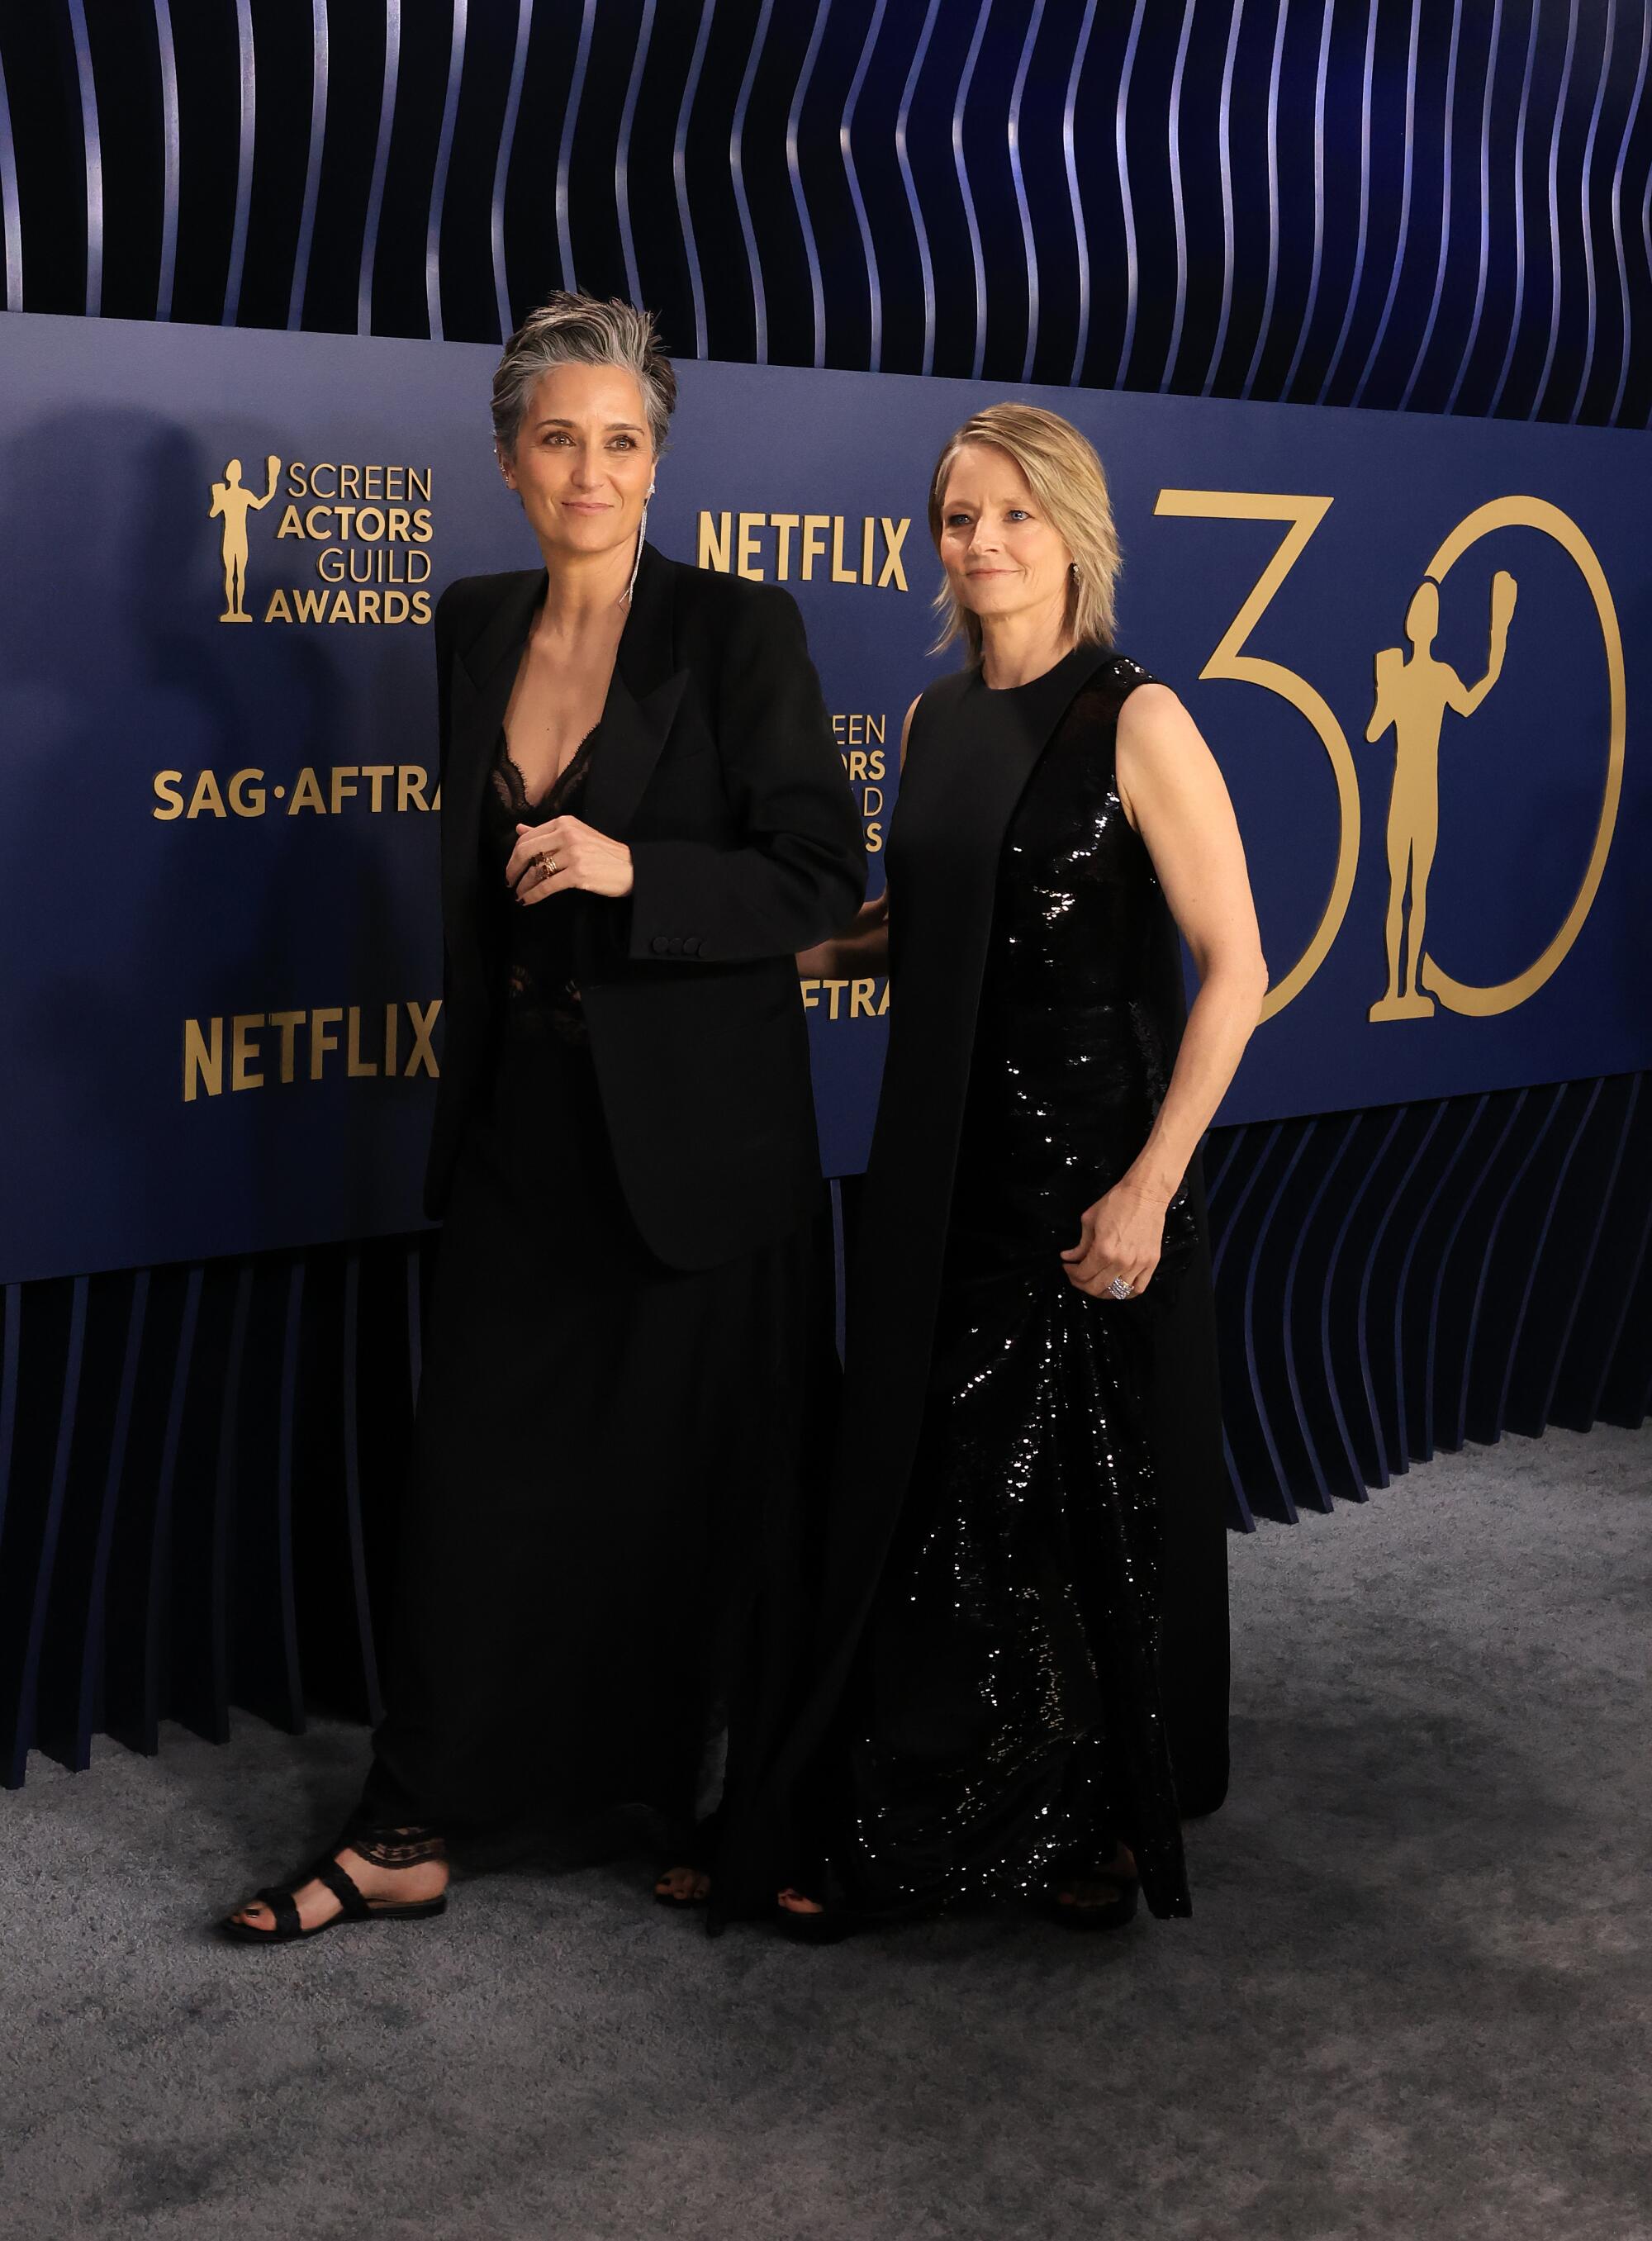 Alexandra Hedison and Jodie Foster wear black at the SAG Awards. 